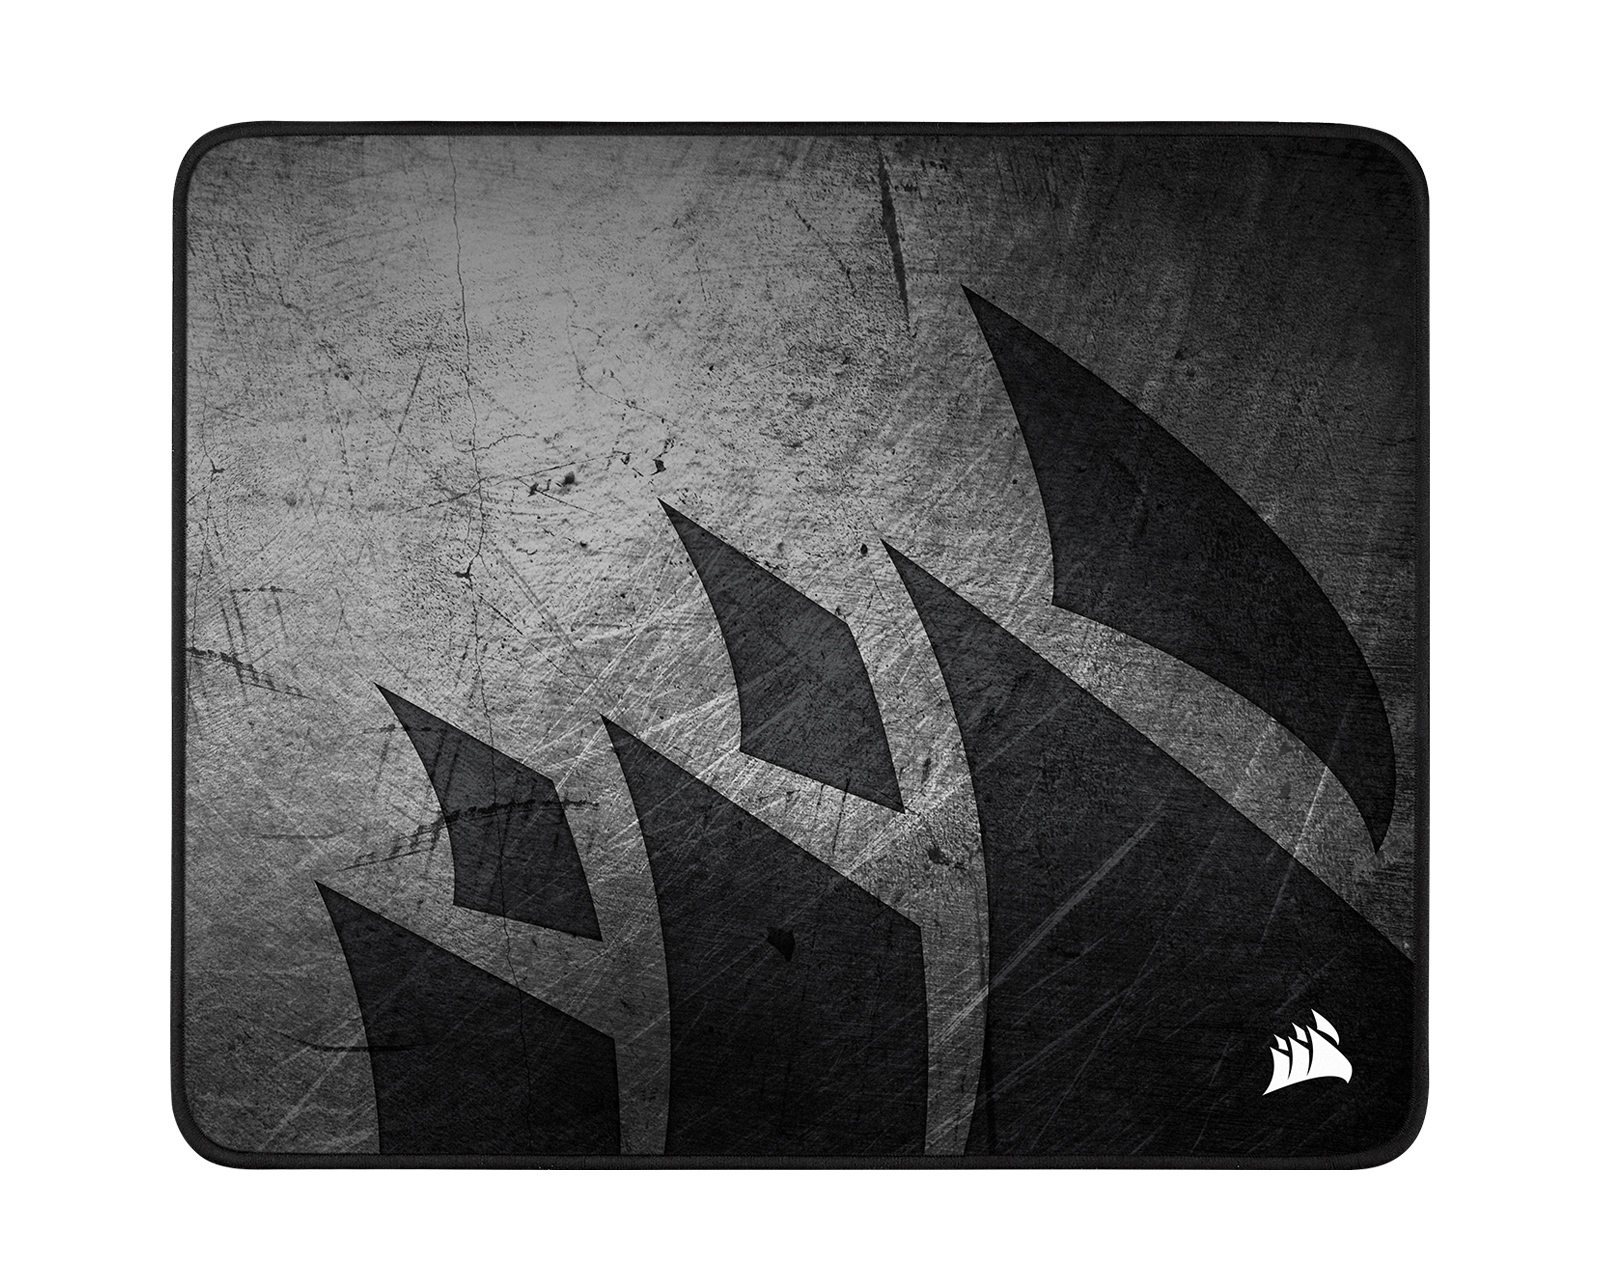 Artisan Hien FX MID XL Gaming Mouse Pad - RED WINE DRAGON